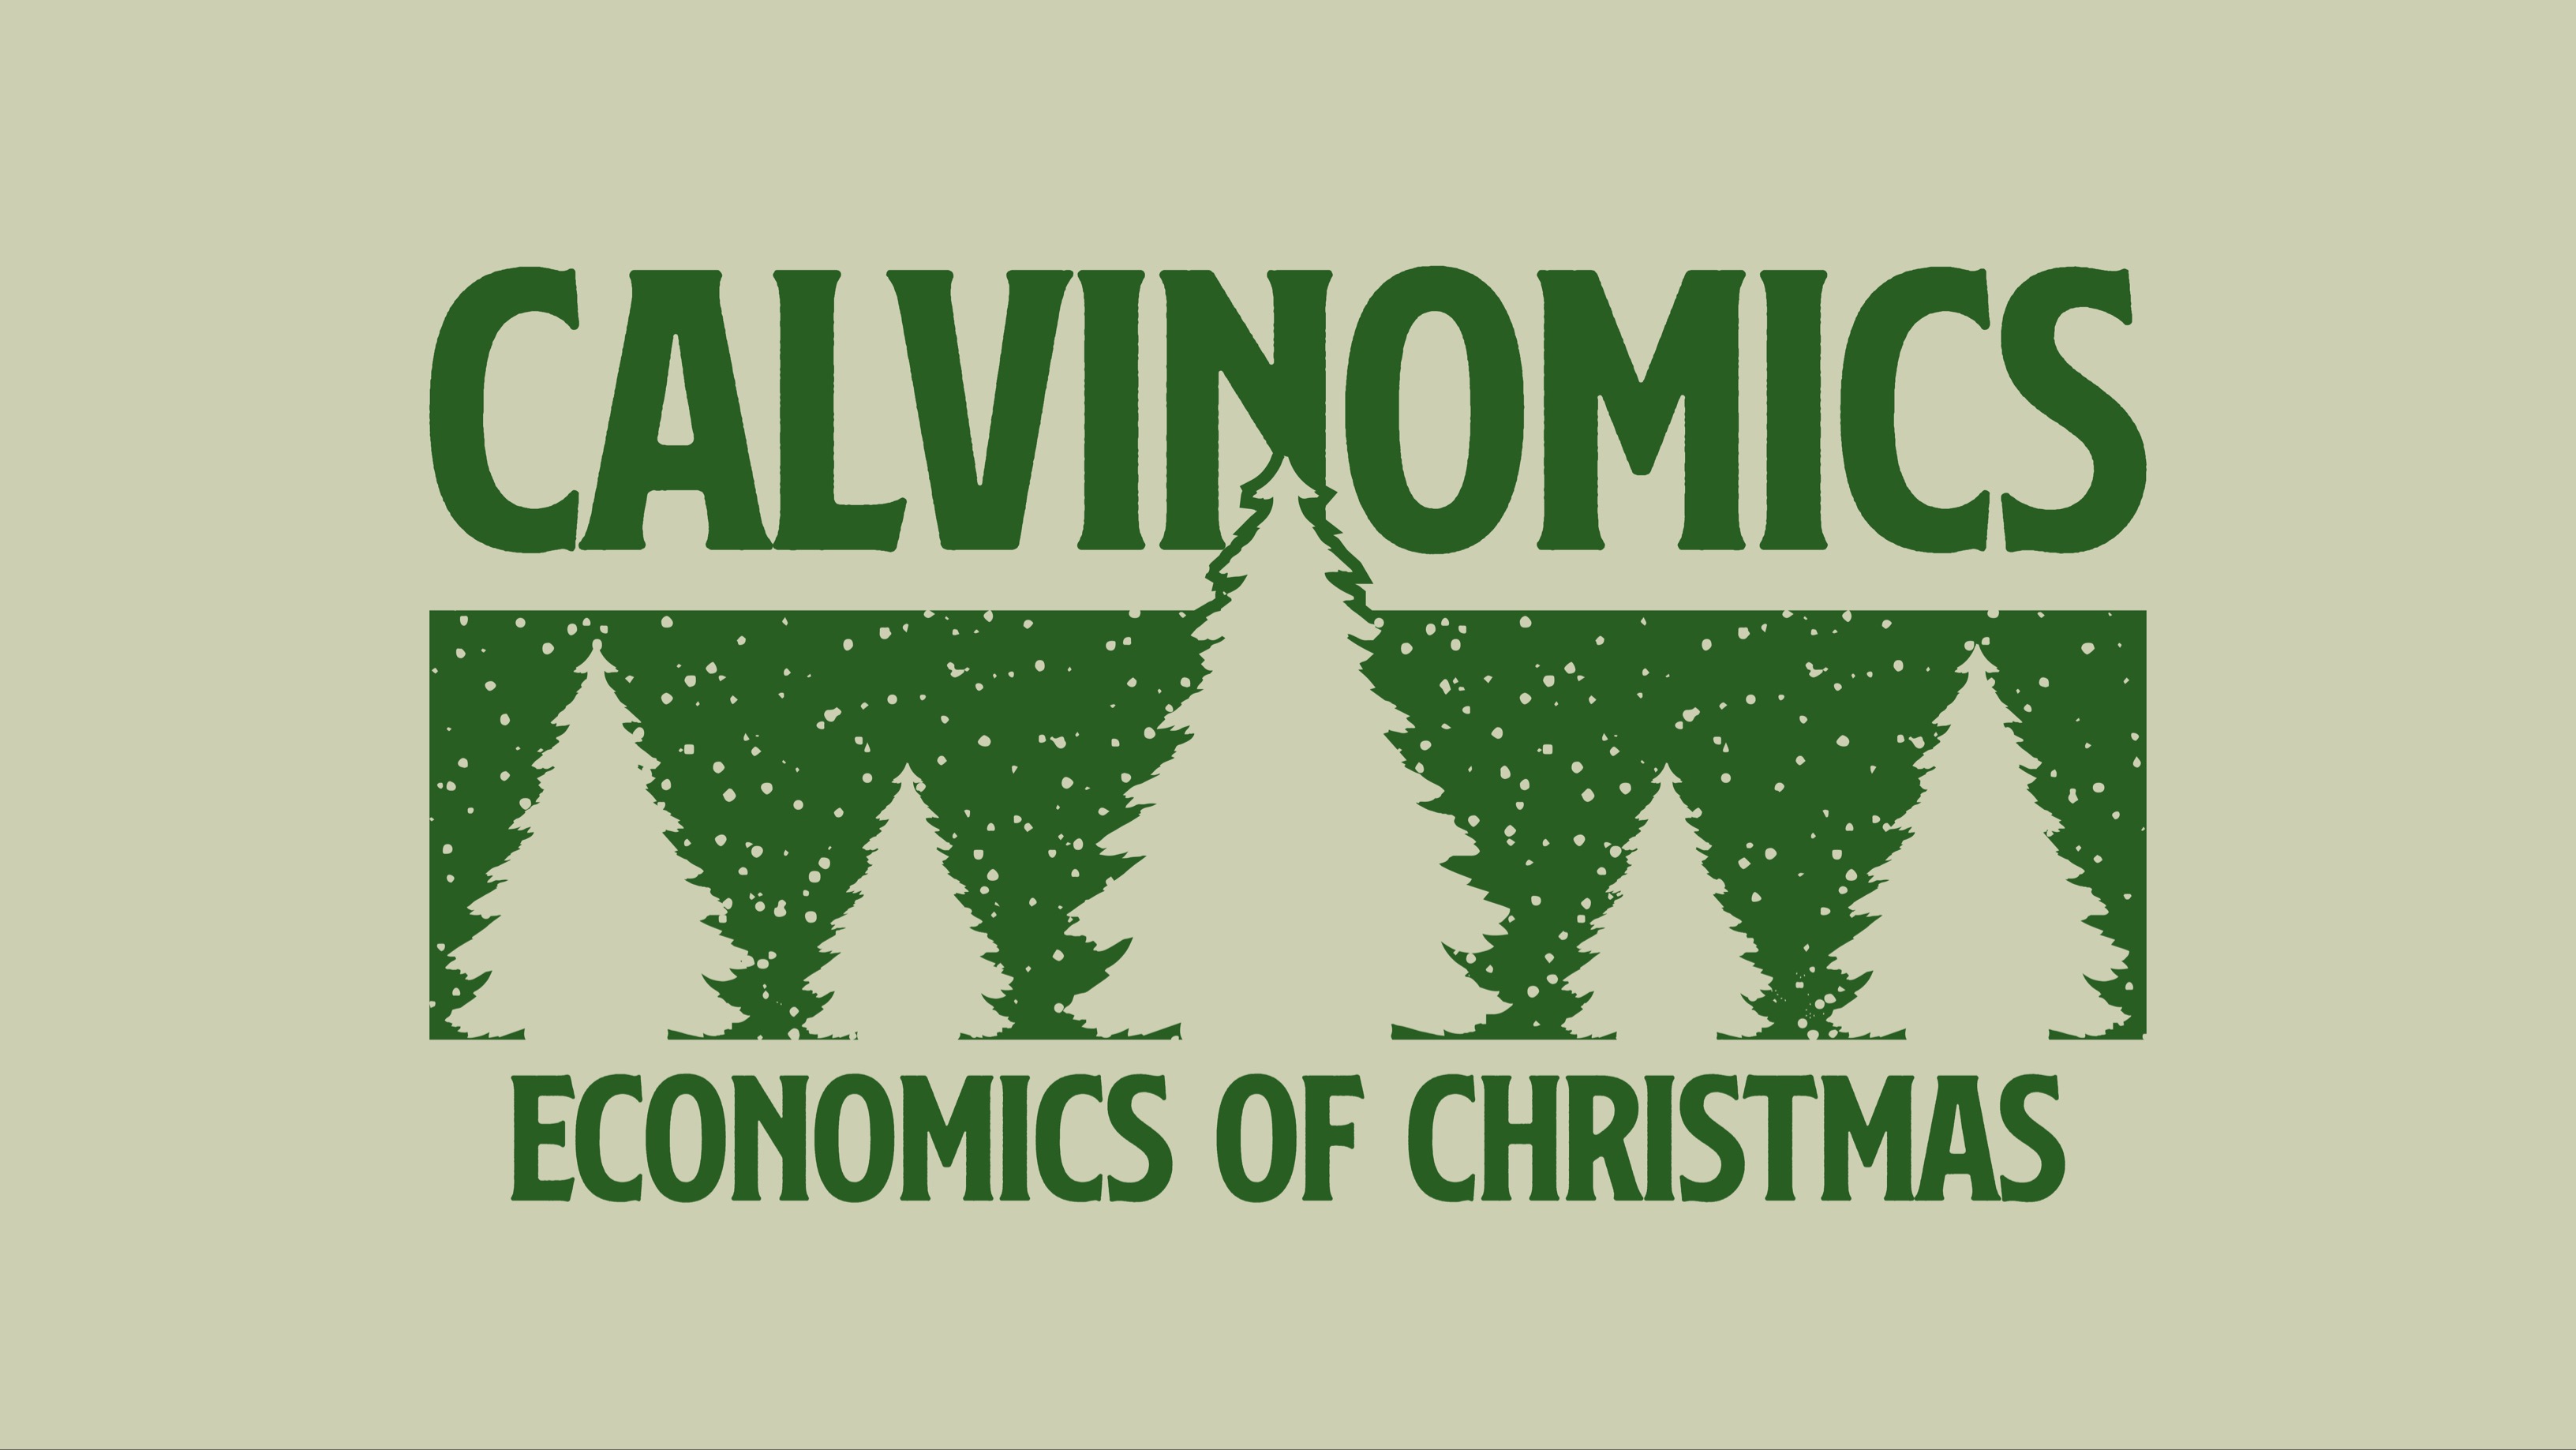 green text on green background that says calvinomics and economic of christmas split by christmas trees